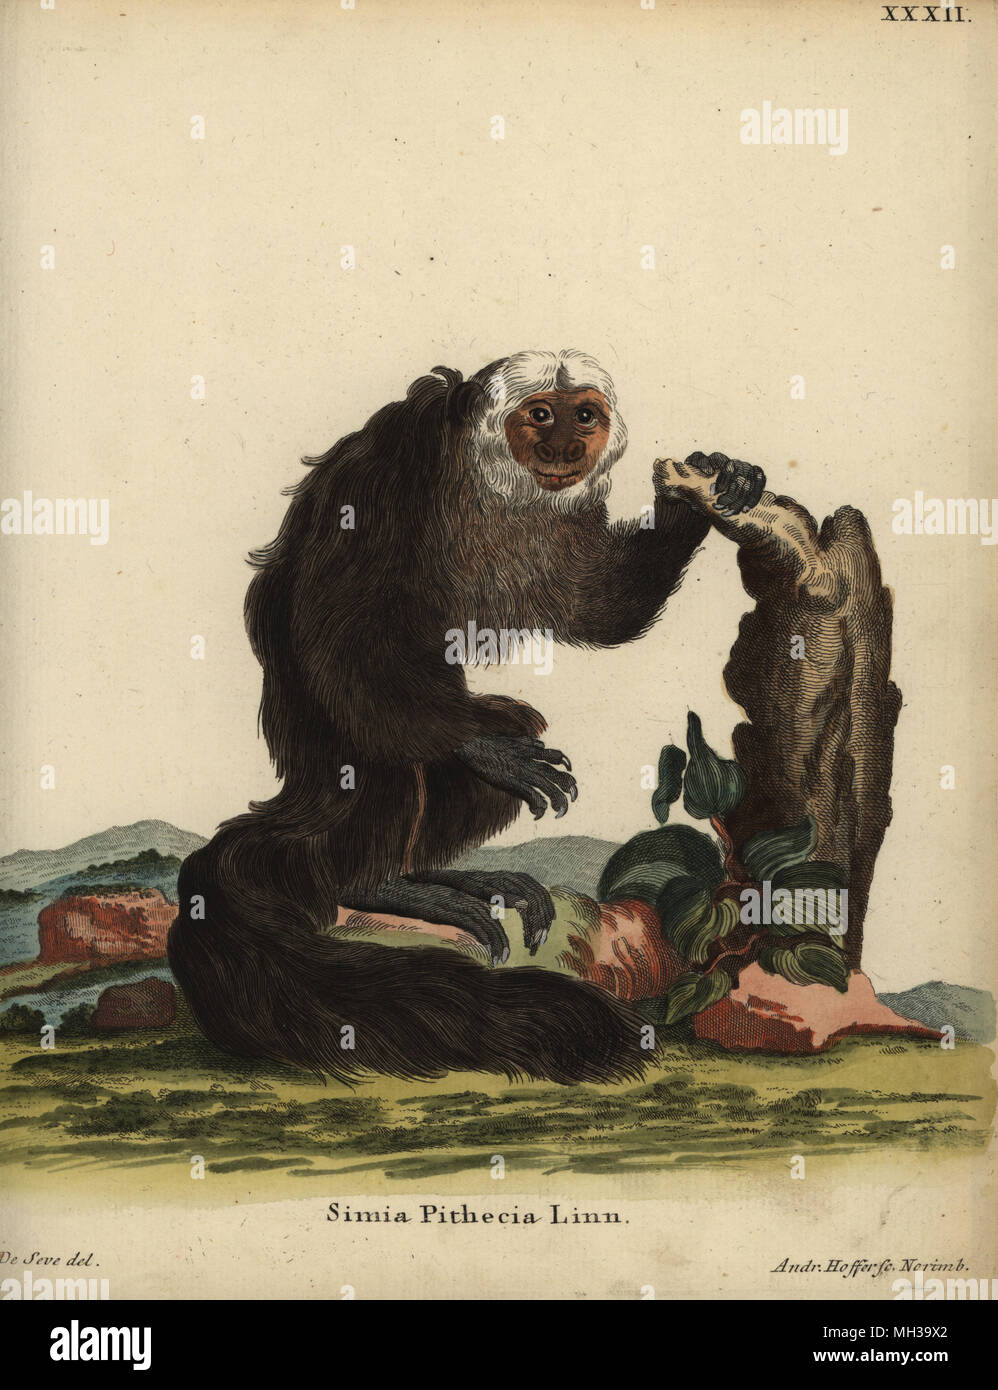 White-faced saki or Guianan saki, Pithecia pithecia. Simia pithecia Linn. Handcoloured copperplate engraving by Andreas Hoffer after an illustration by Jacques de Seve from Johann Christian Daniel Schreber's Animal Illustrations after Nature, or Schreber's Fantastic Animals, Erlangen, Germany, 1775. Stock Photo